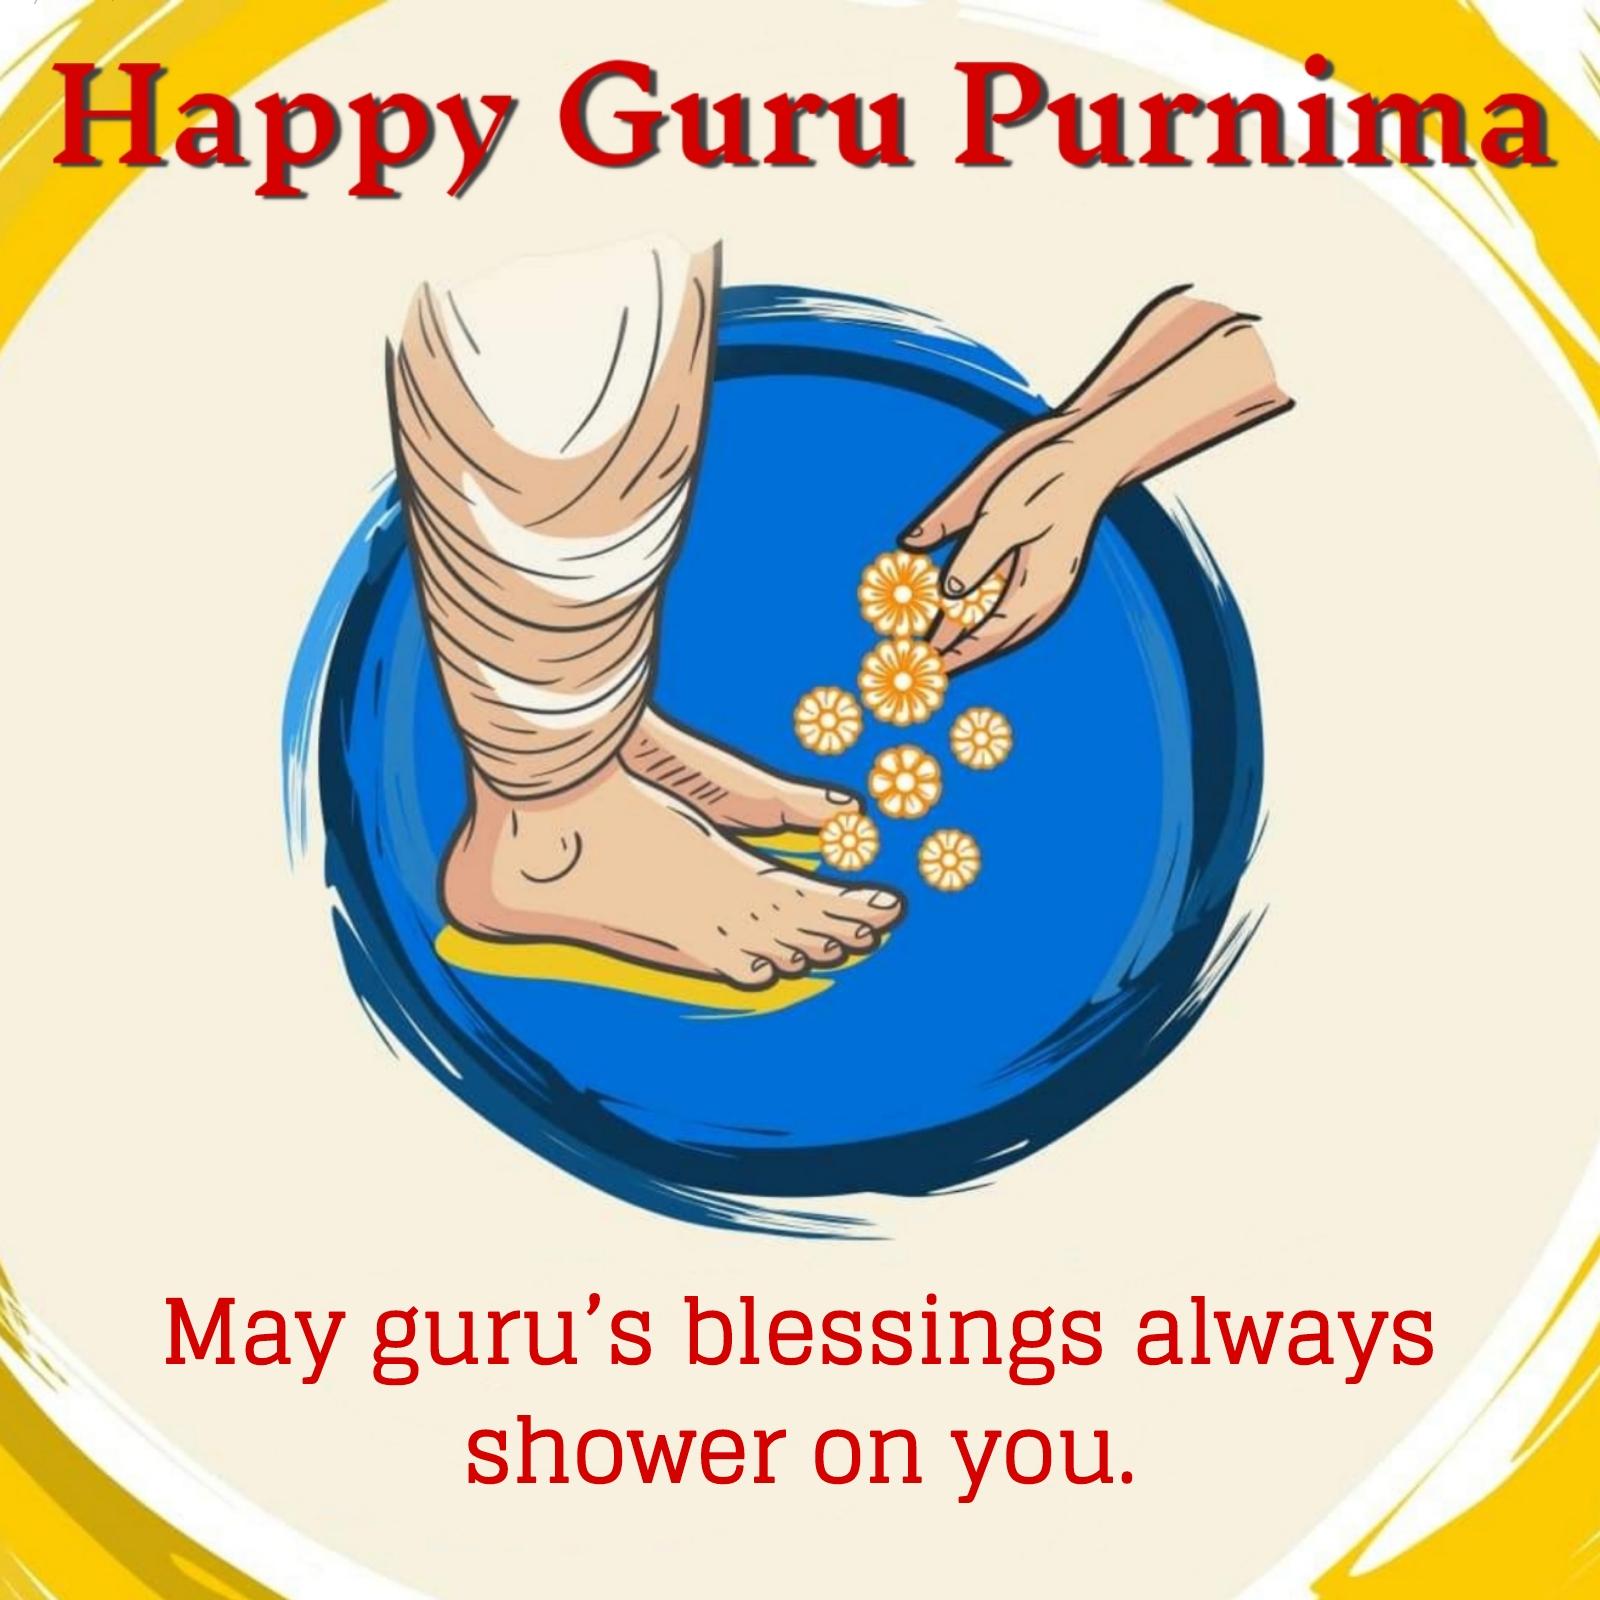 May gurus blessings always shower on you wish you